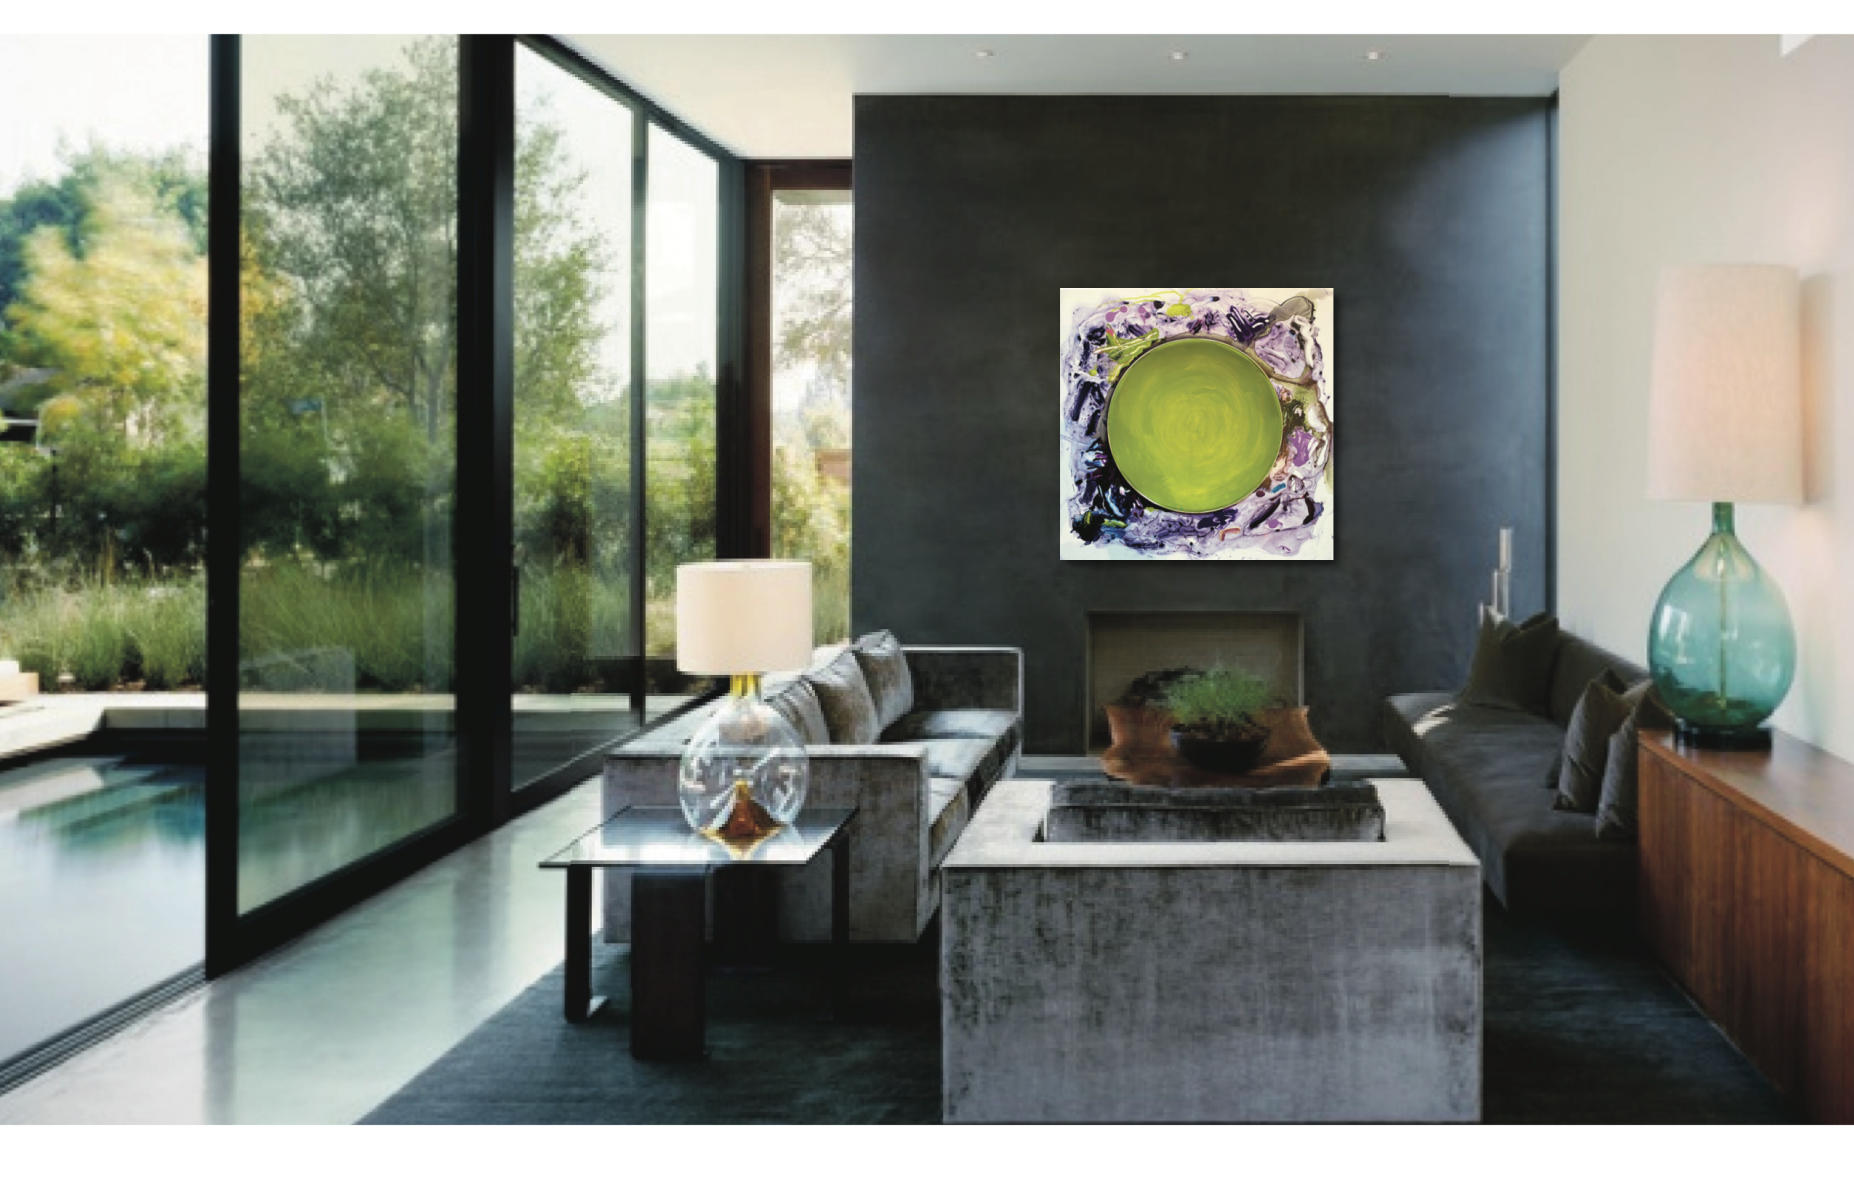 "Spring Green Host" | Approximate unframed scale view